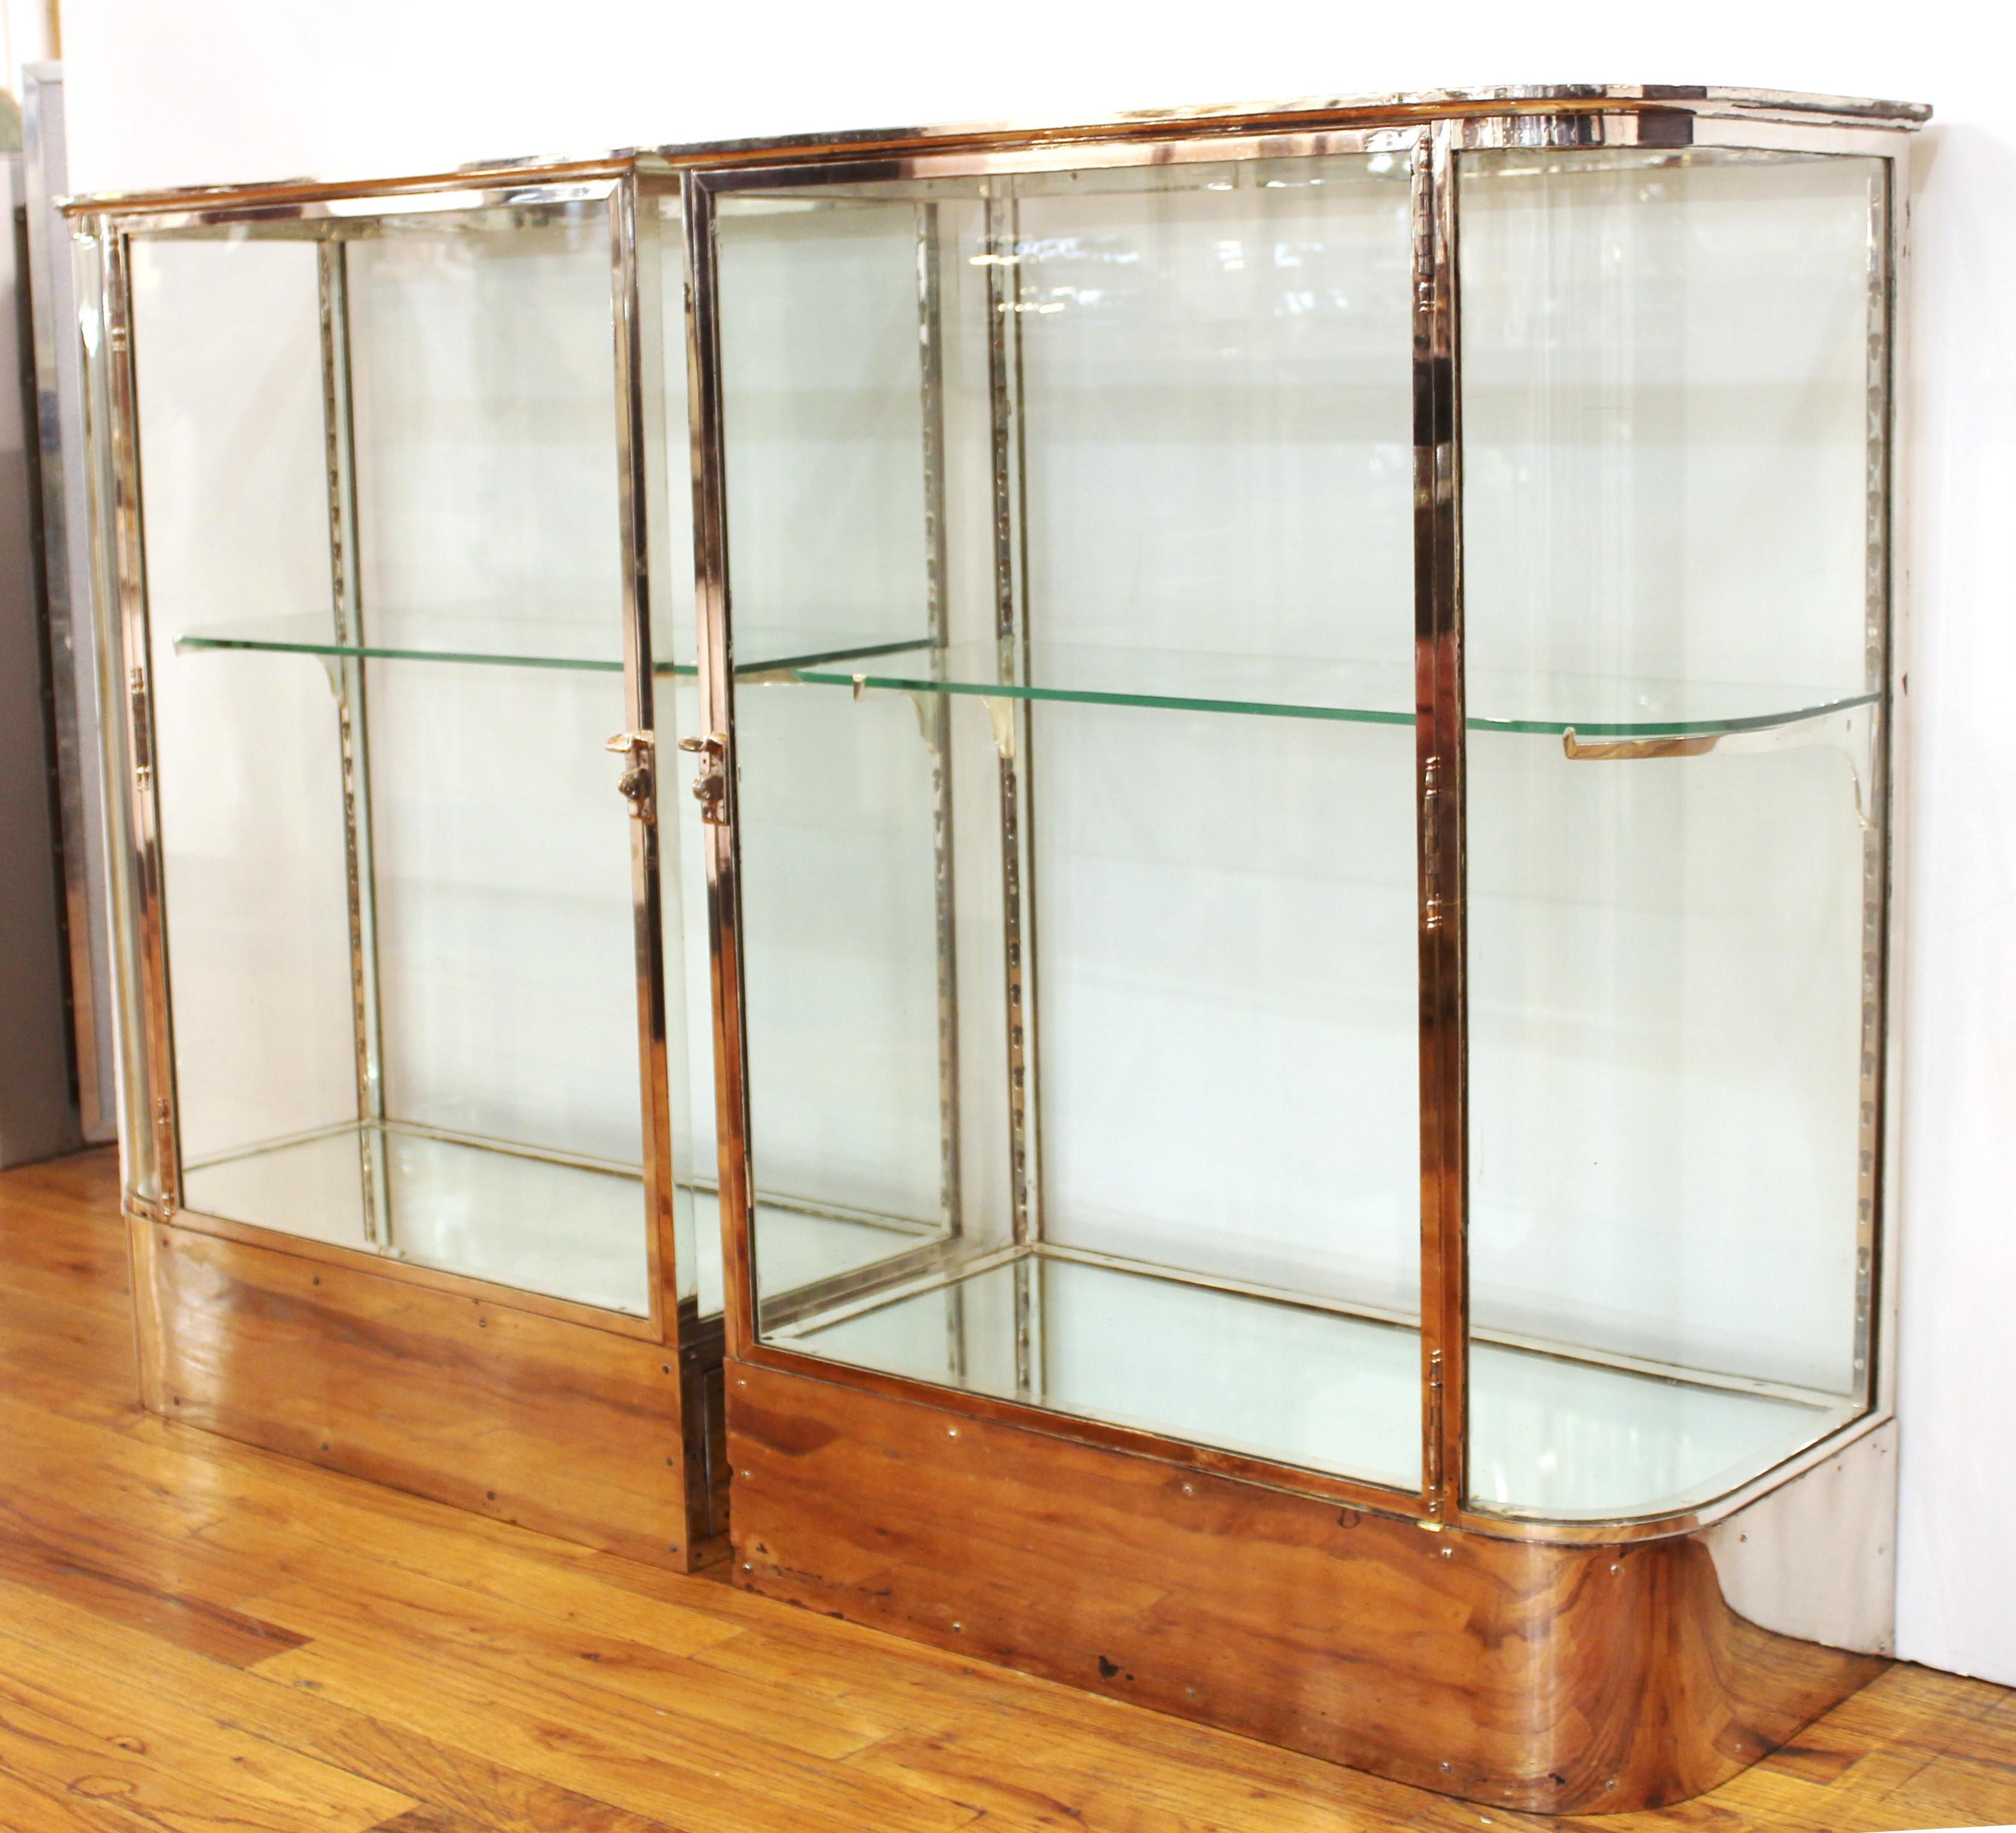 American Art Deco period pair of glass display cabinets in chromed metal with one glass shelf each. Each cabinet has one rounded corner on opposite sides and a mirrored bottom shelf. Minor age-related wear and surface scratches to the chrome. Minor